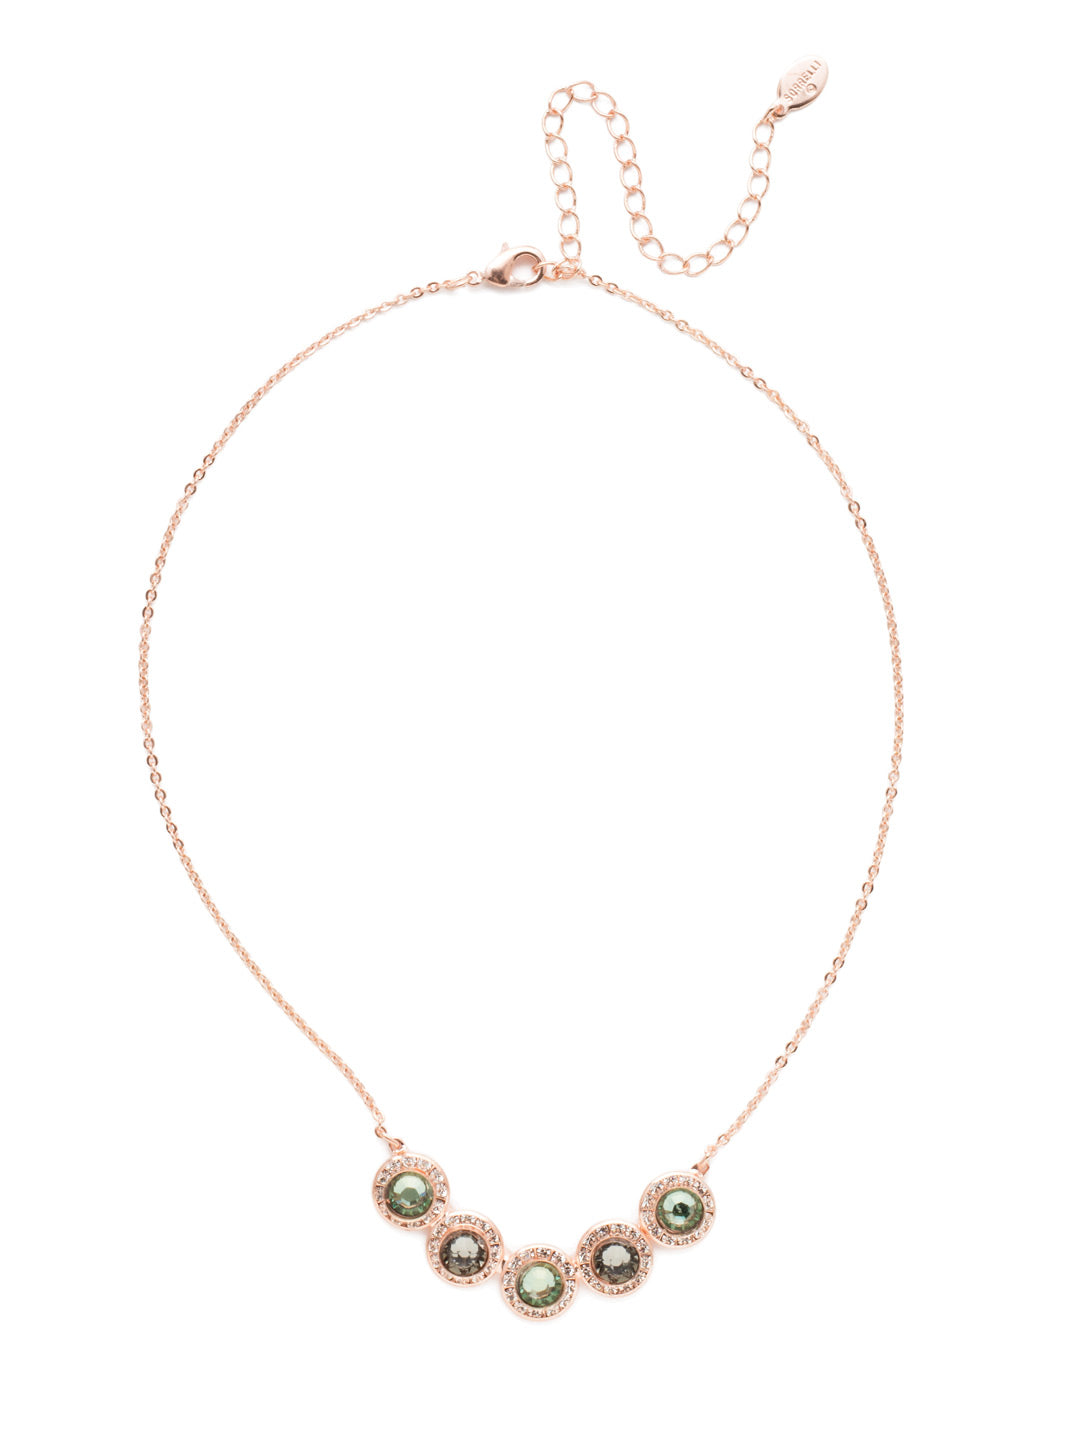 Saylor Tennis Necklace - NET14RGCAZ - The Saylor Tennis Necklace features a delicate chain centered with a set of sparkling circular crystal stones that shine bright. From Sorrelli's Crystal Azure collection in our Rose Gold-tone finish.